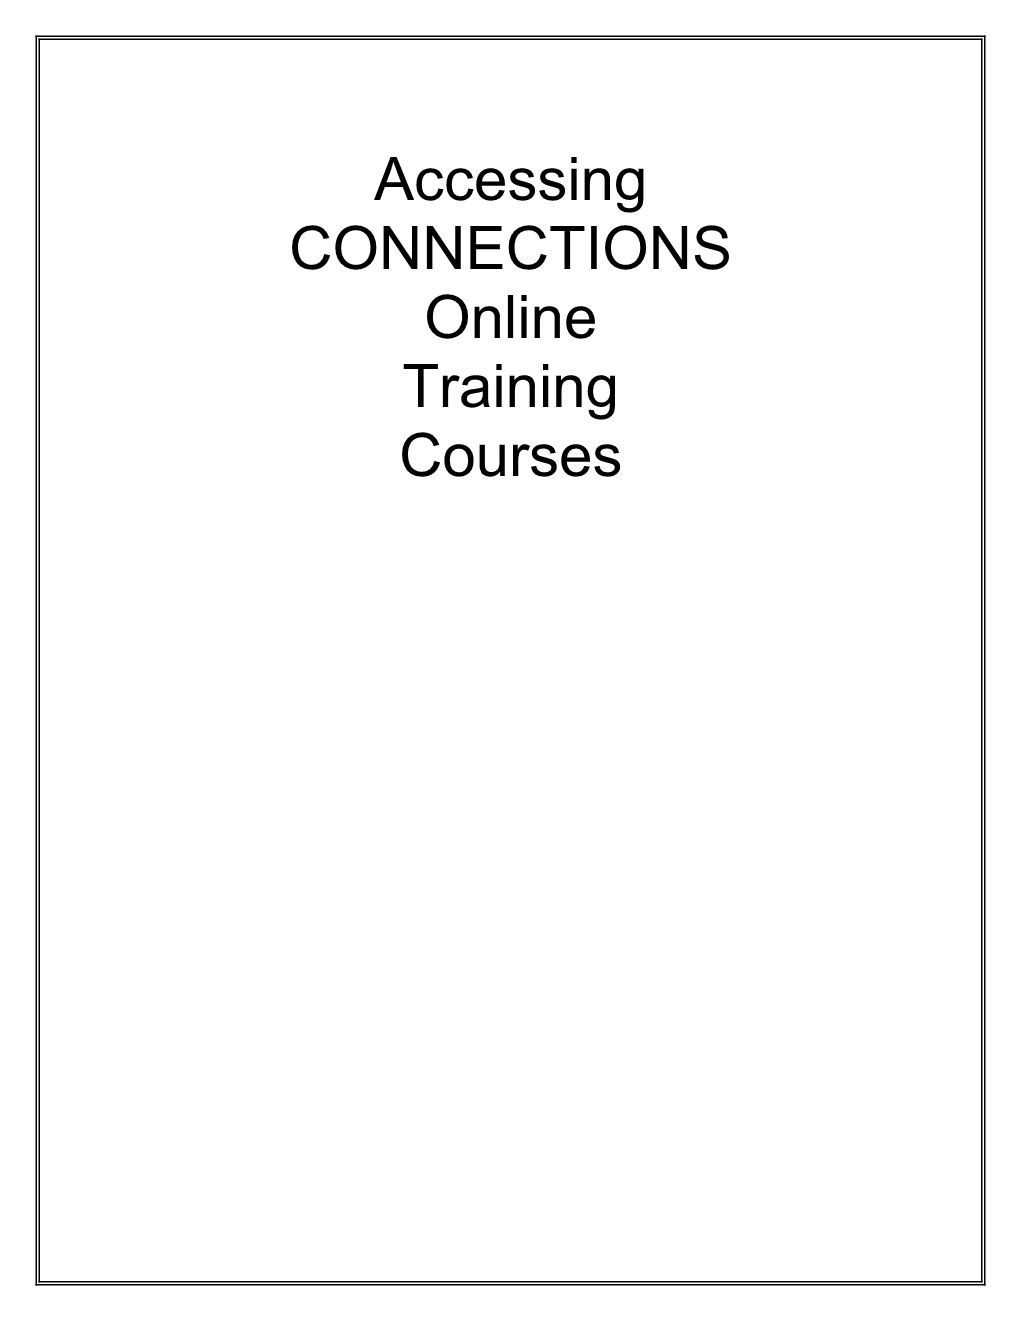 Taking an Online Training Course